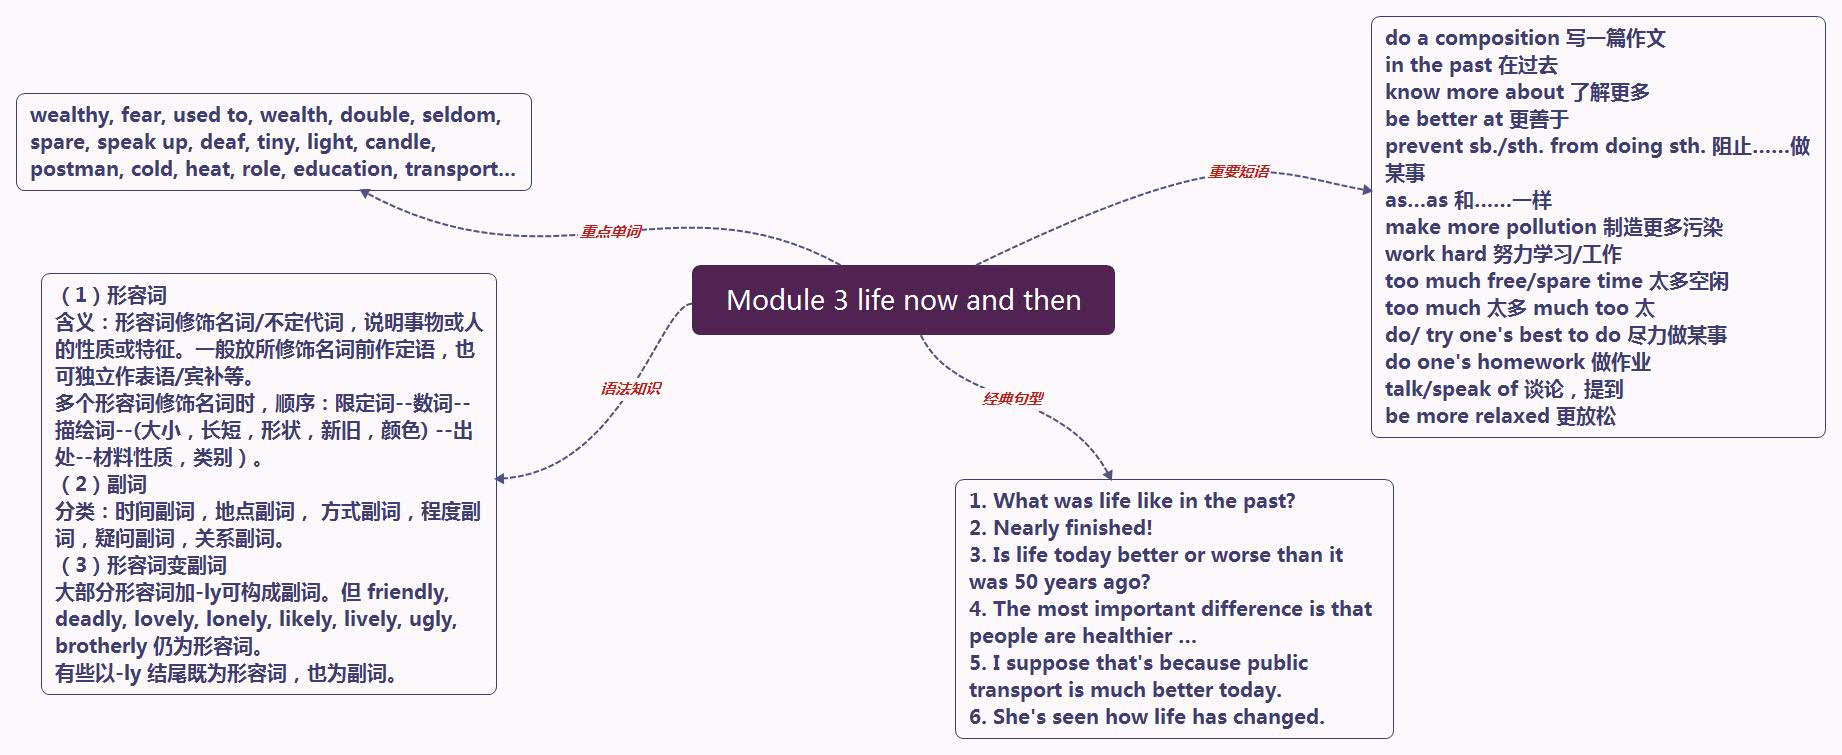 Module 3 life now and then.jpg